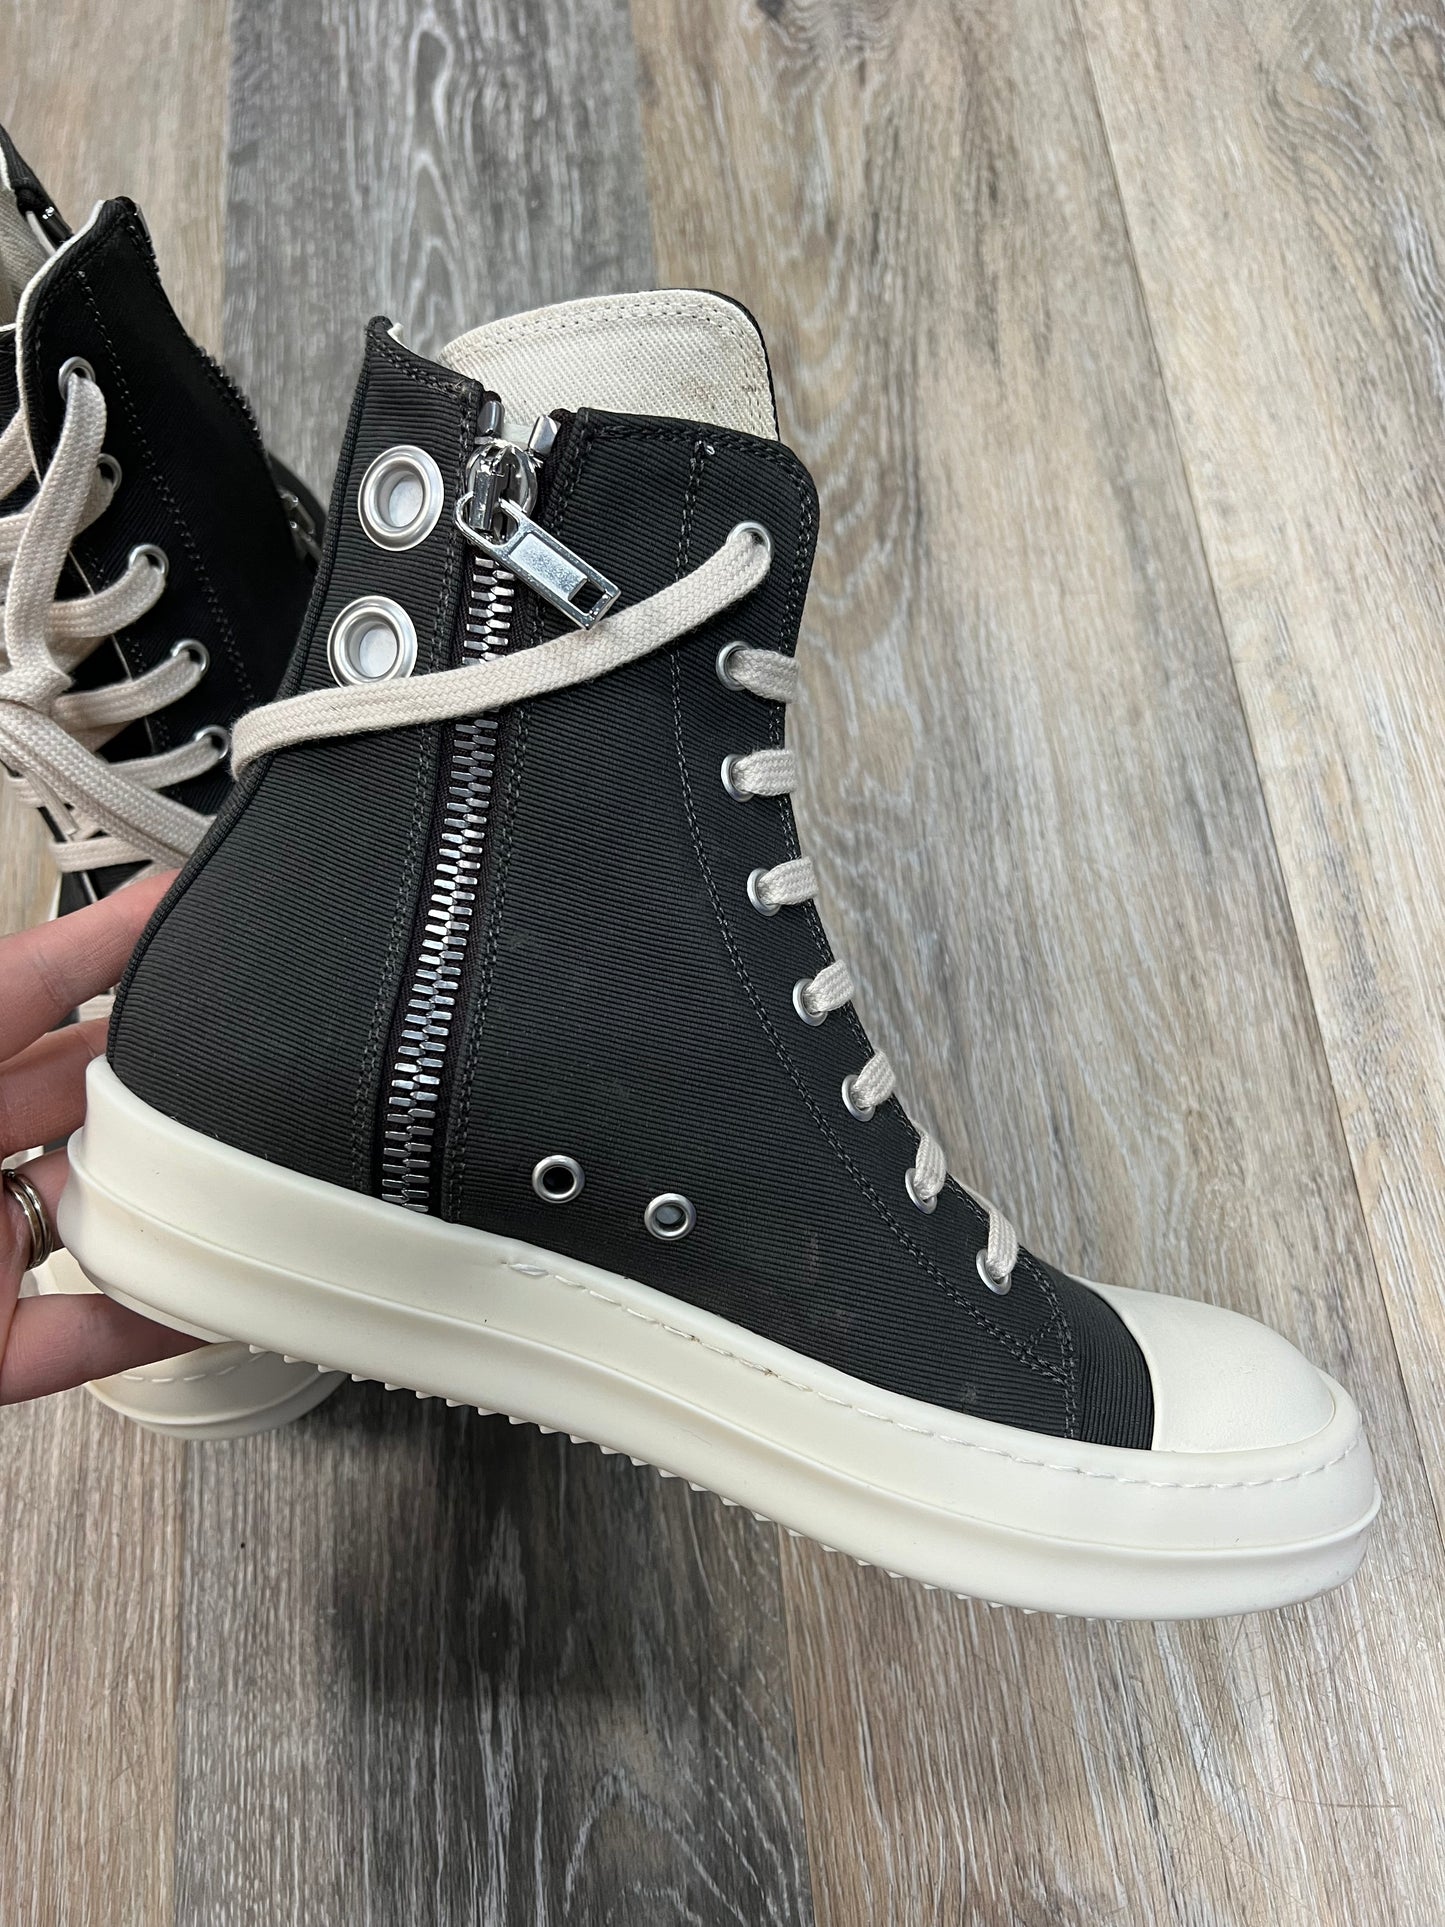 Shoes Designer By Rick Owens  Size: 8.5 (39)